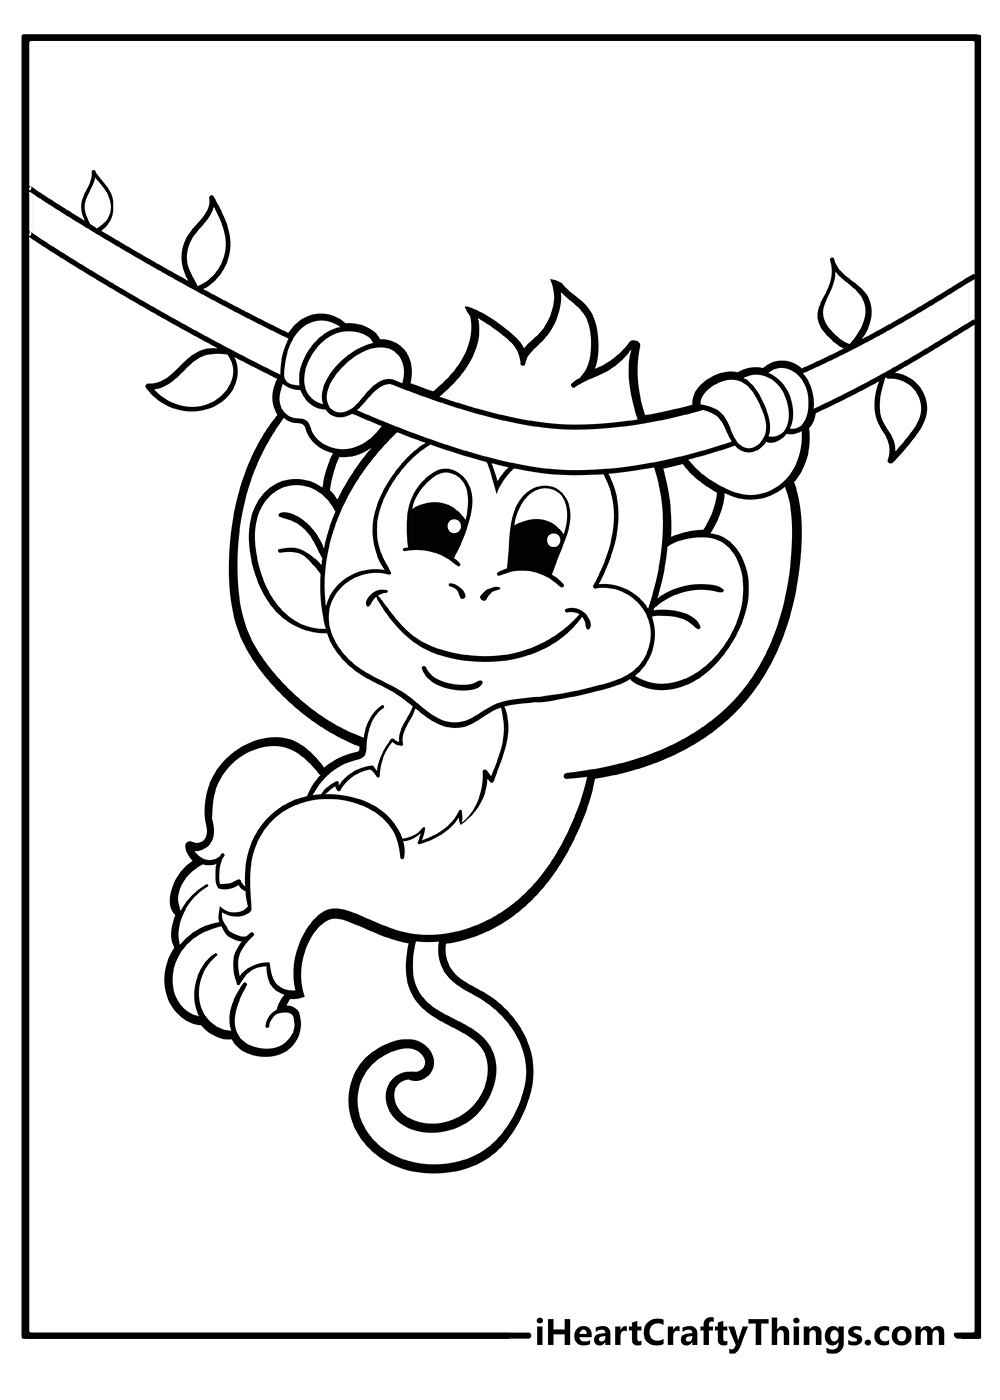 Monkey Coloring Book for kids free printable